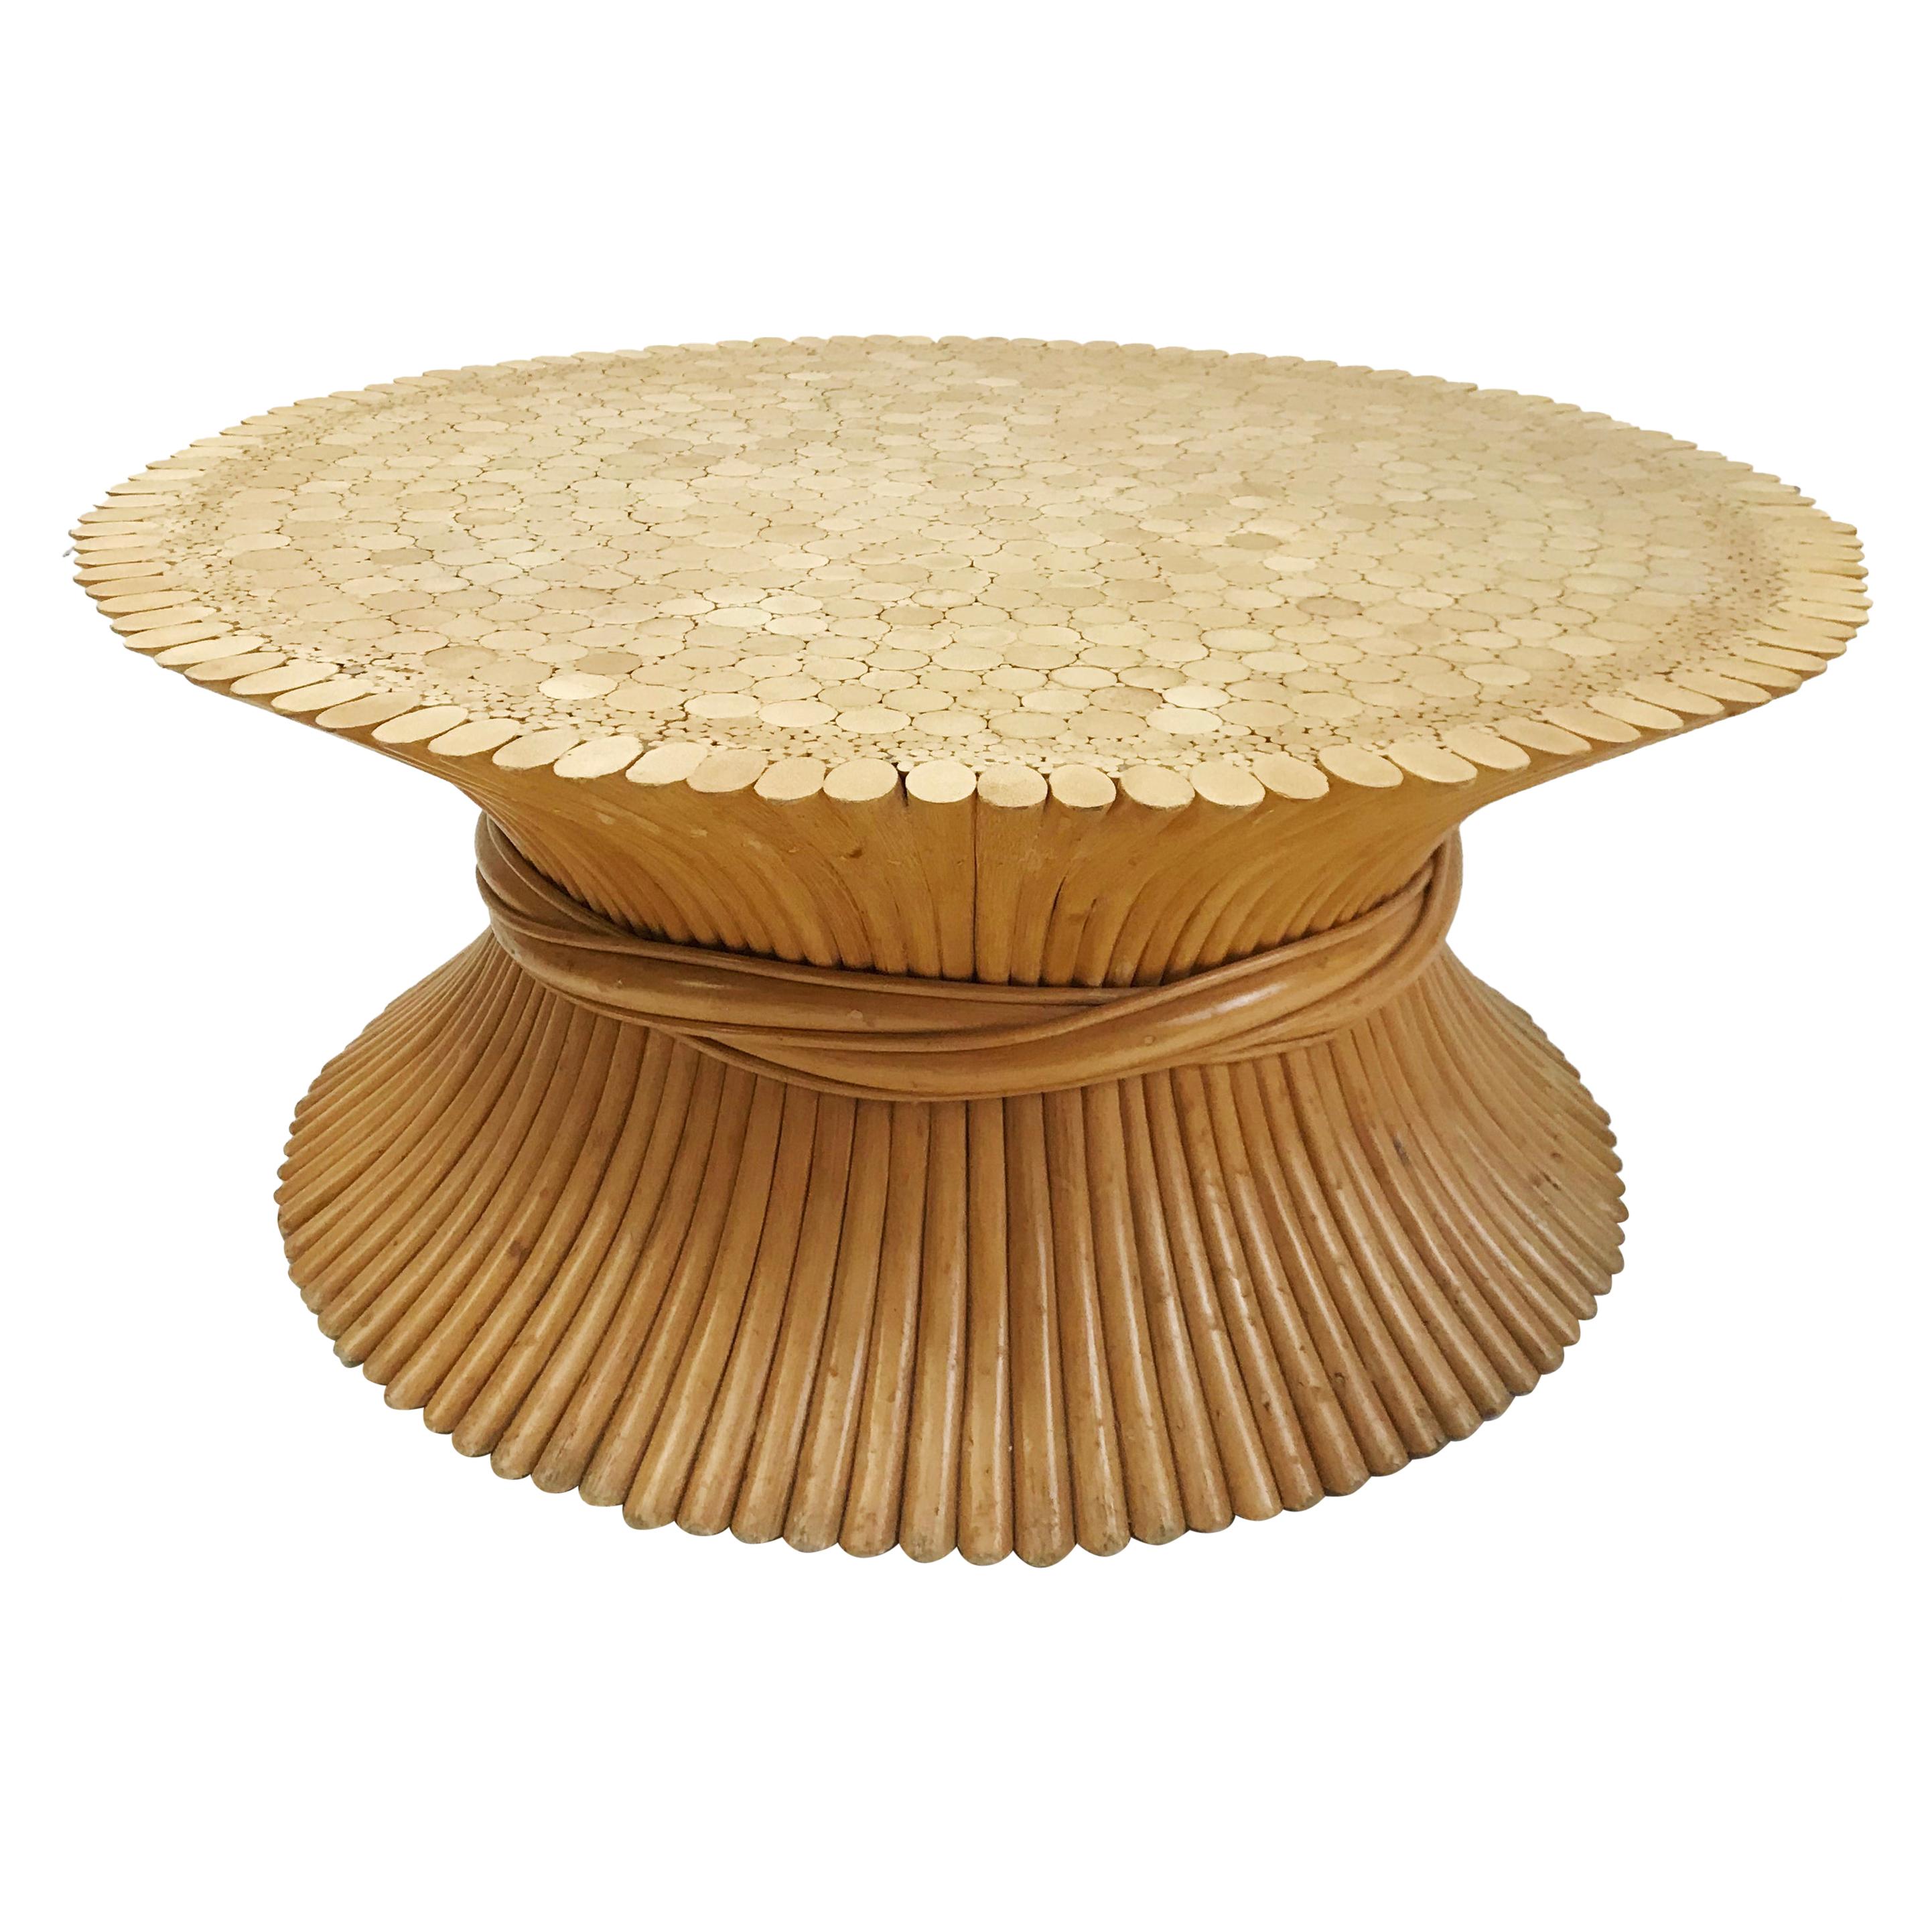 McGUIRE MIDCENTURY Bamboo Wheat Sheaf Coffee Table - Hollywood Regency Style 70s